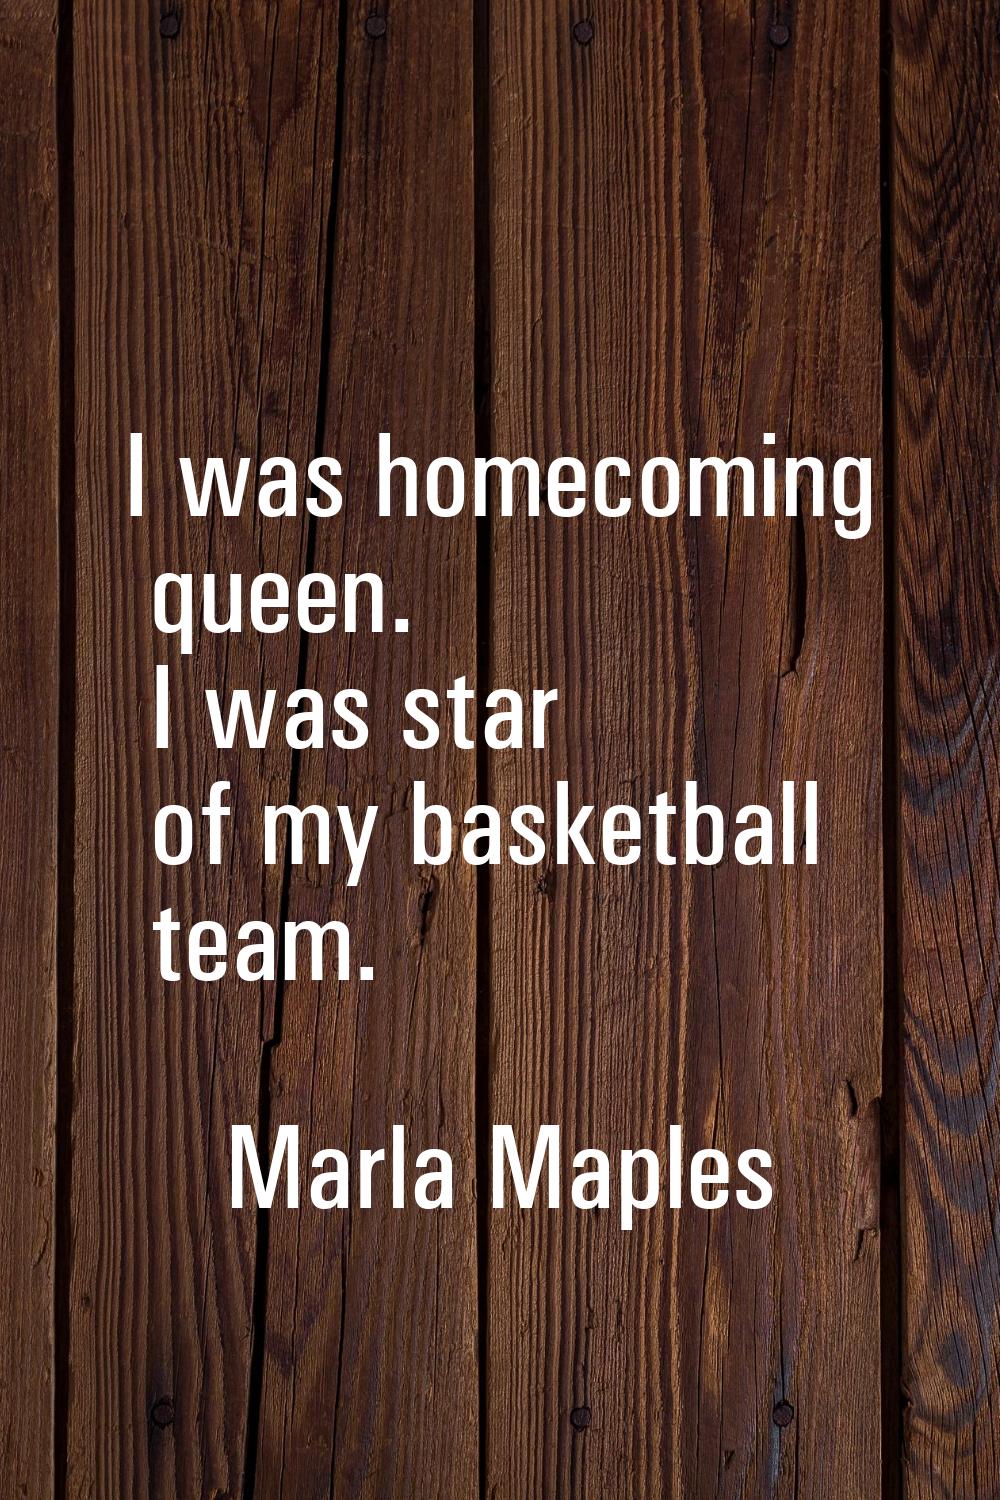 I was homecoming queen. I was star of my basketball team.